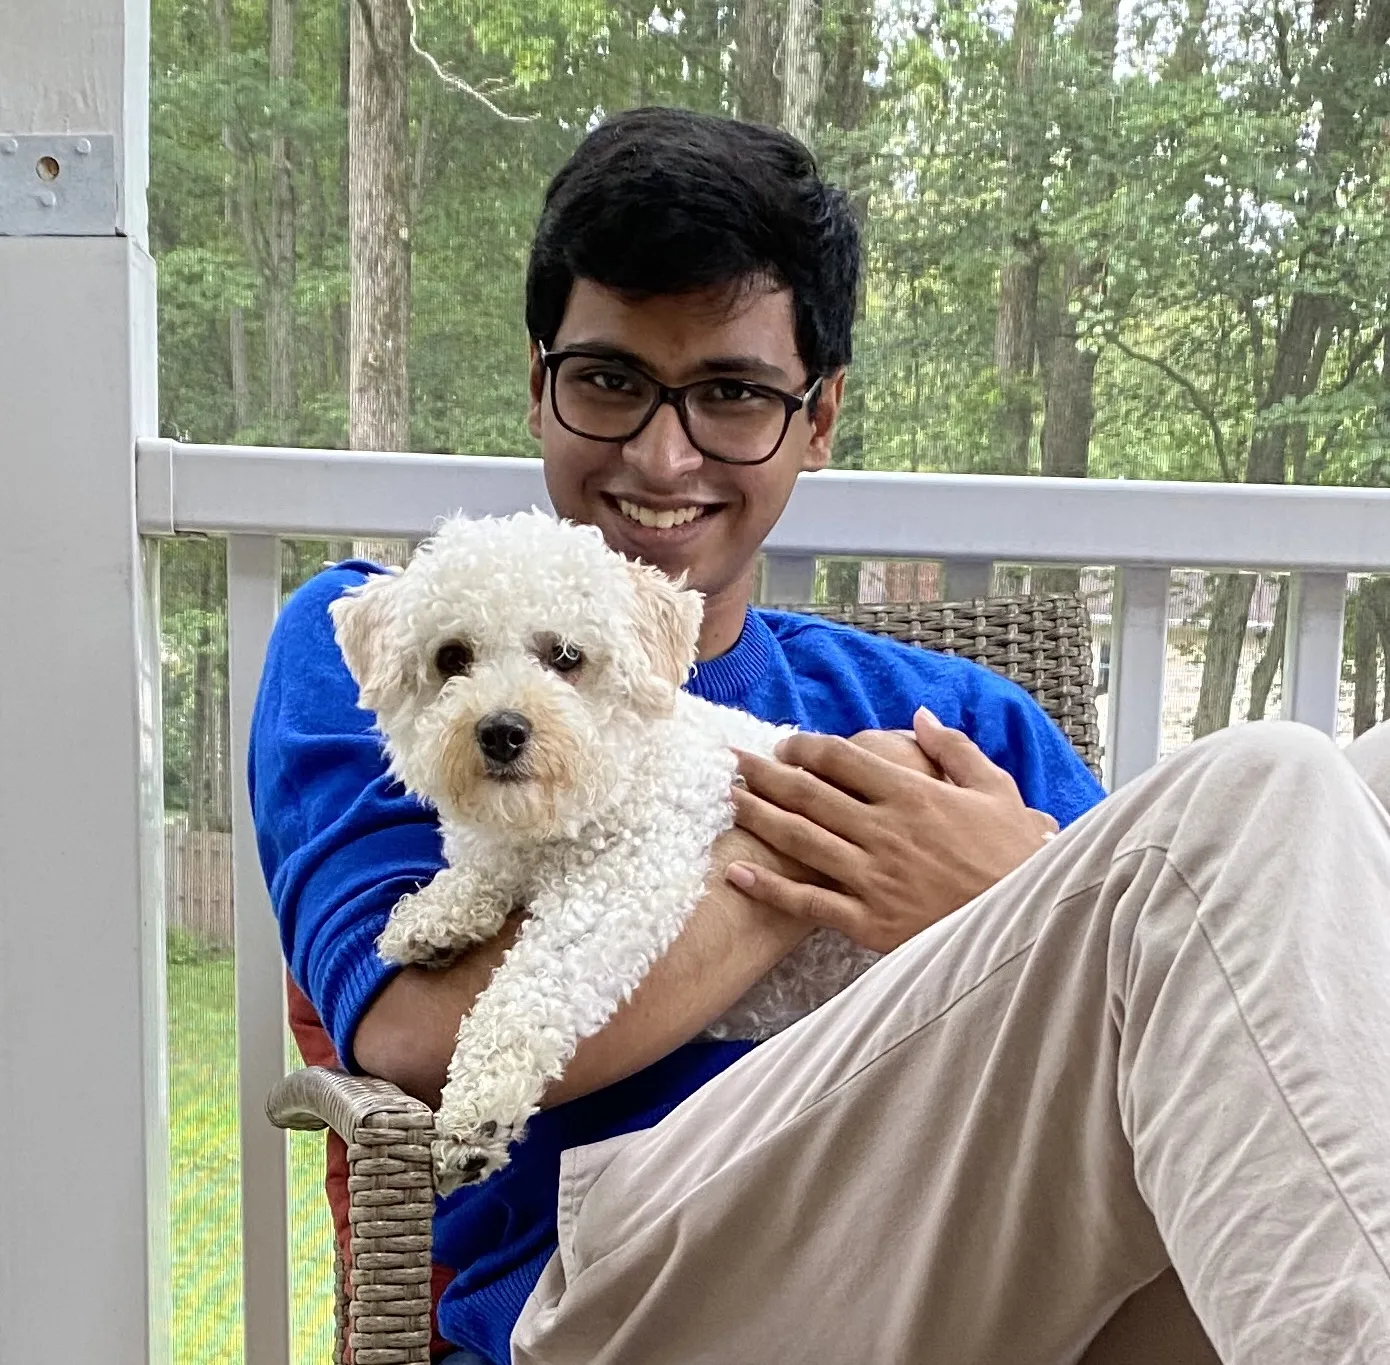 Profile picture of me sitting with a little doggo.